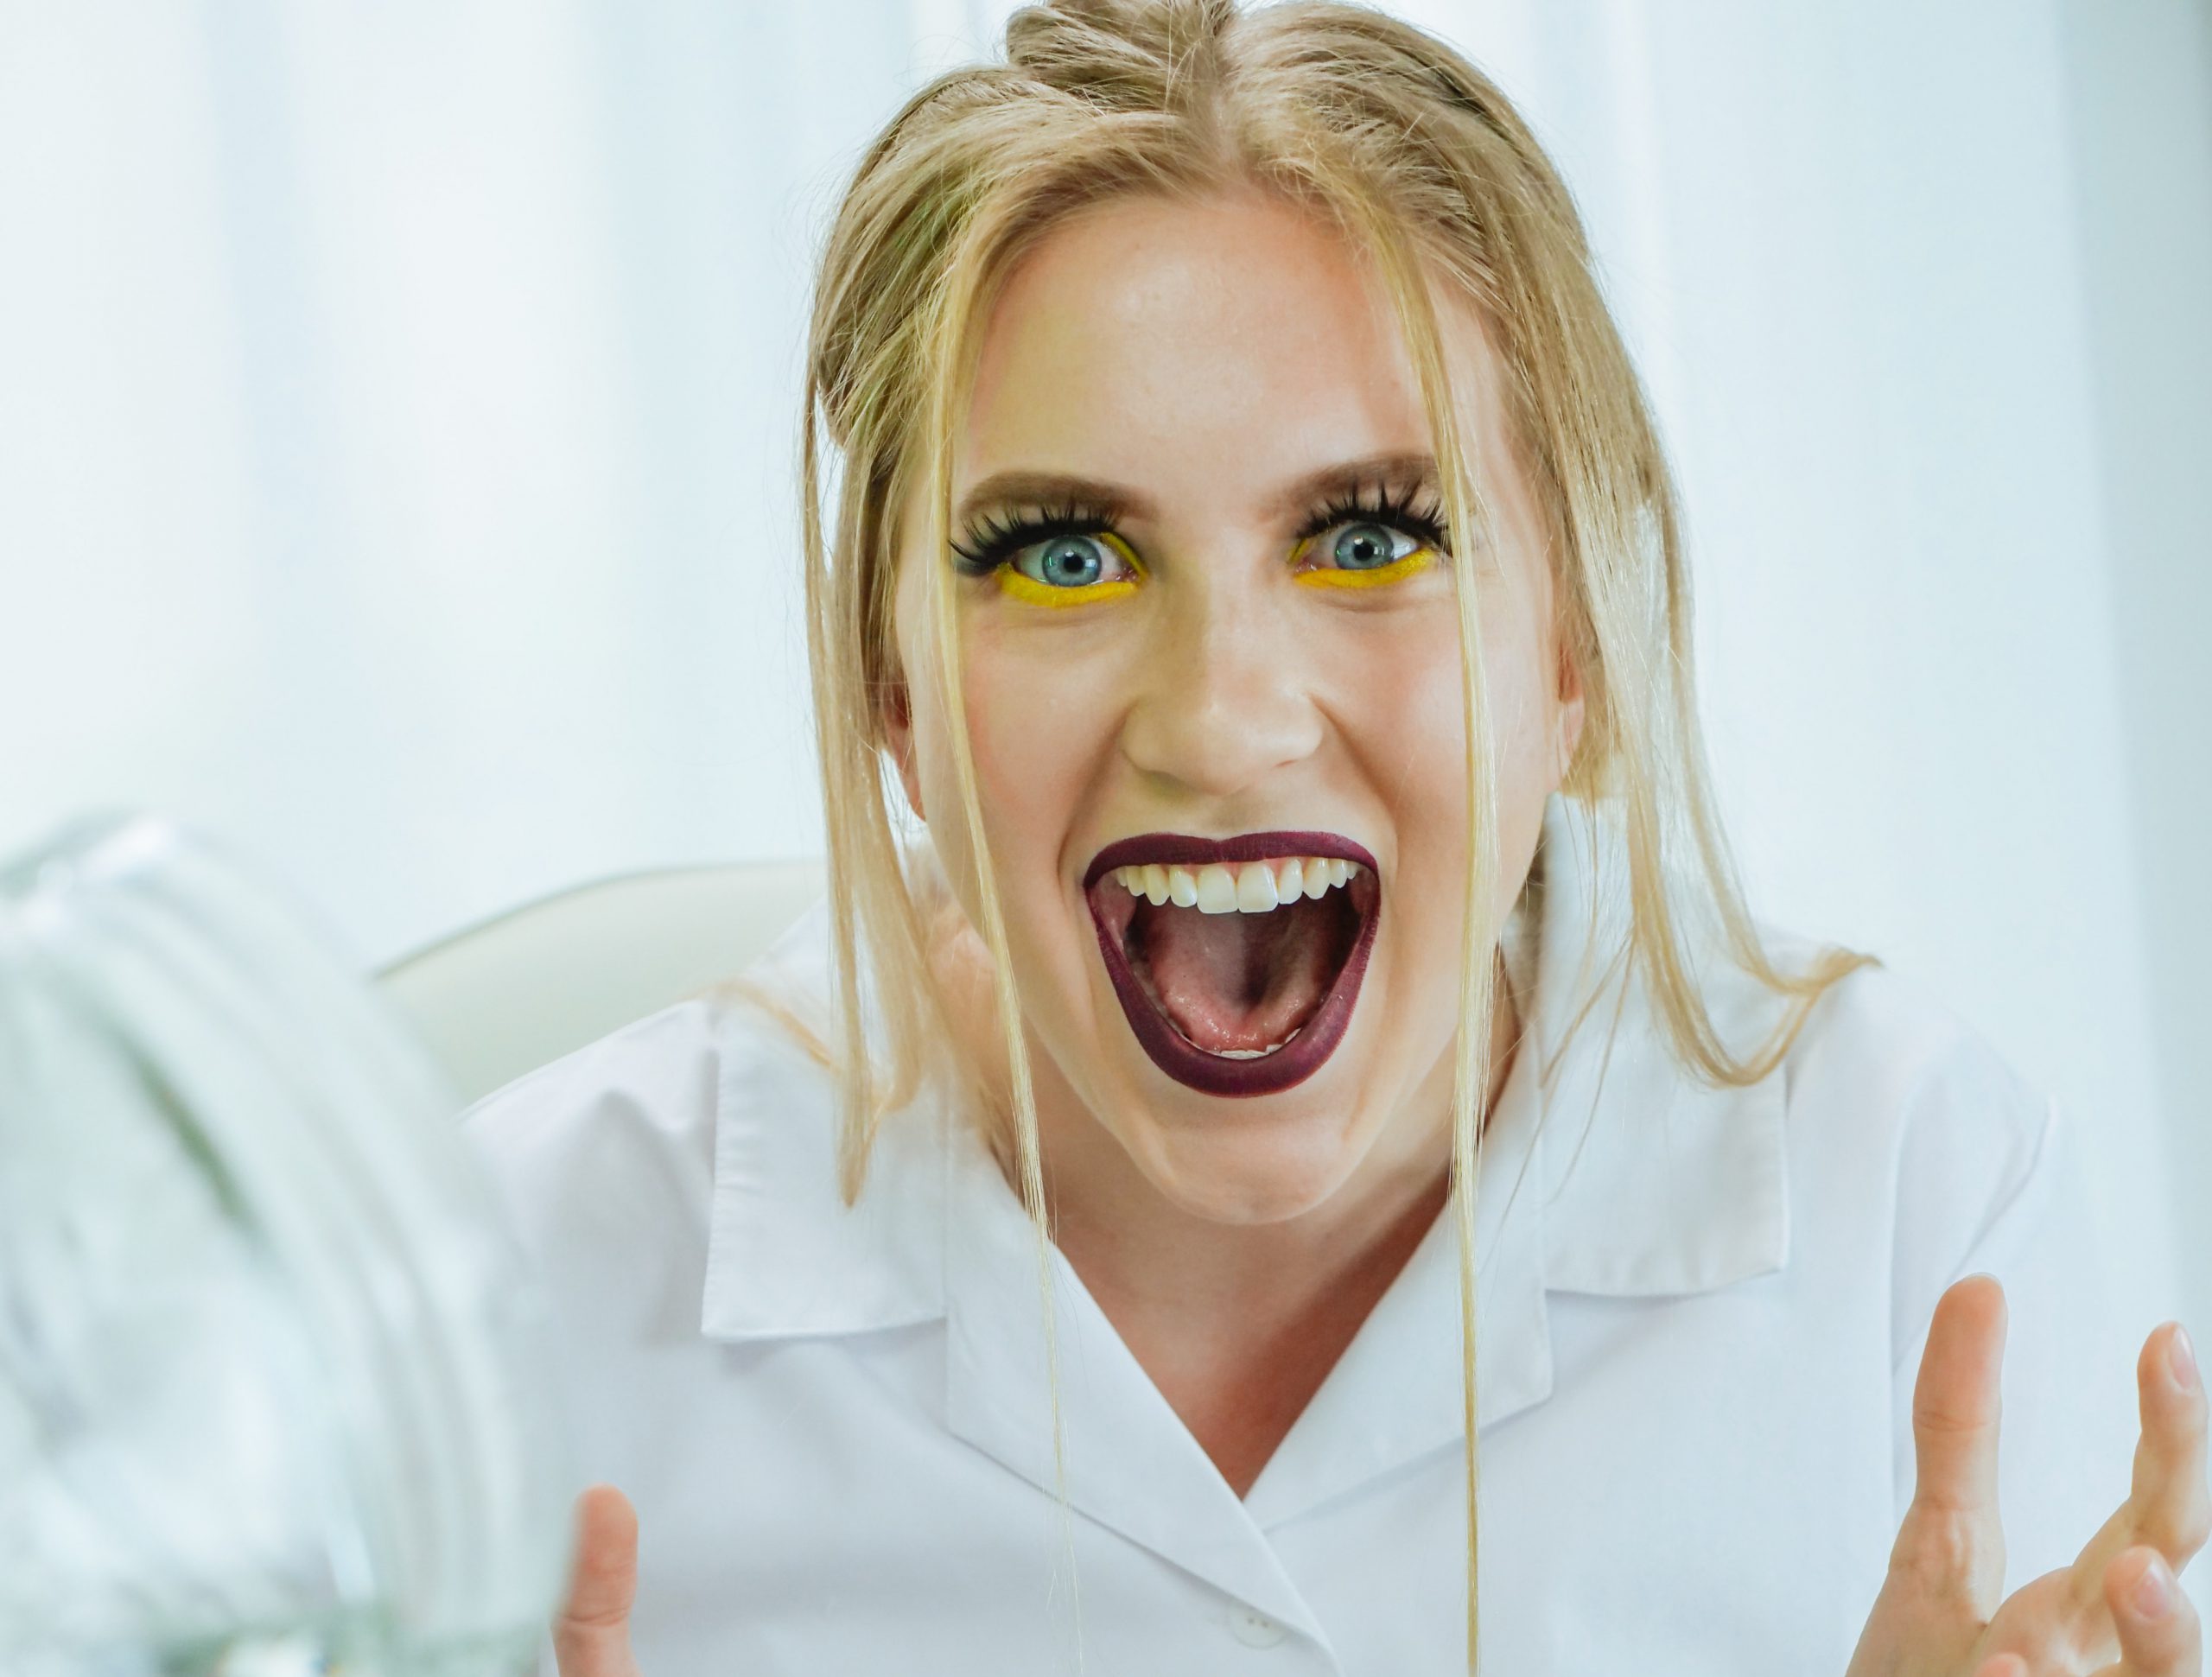 Surprised female biotechnologist with creative make up